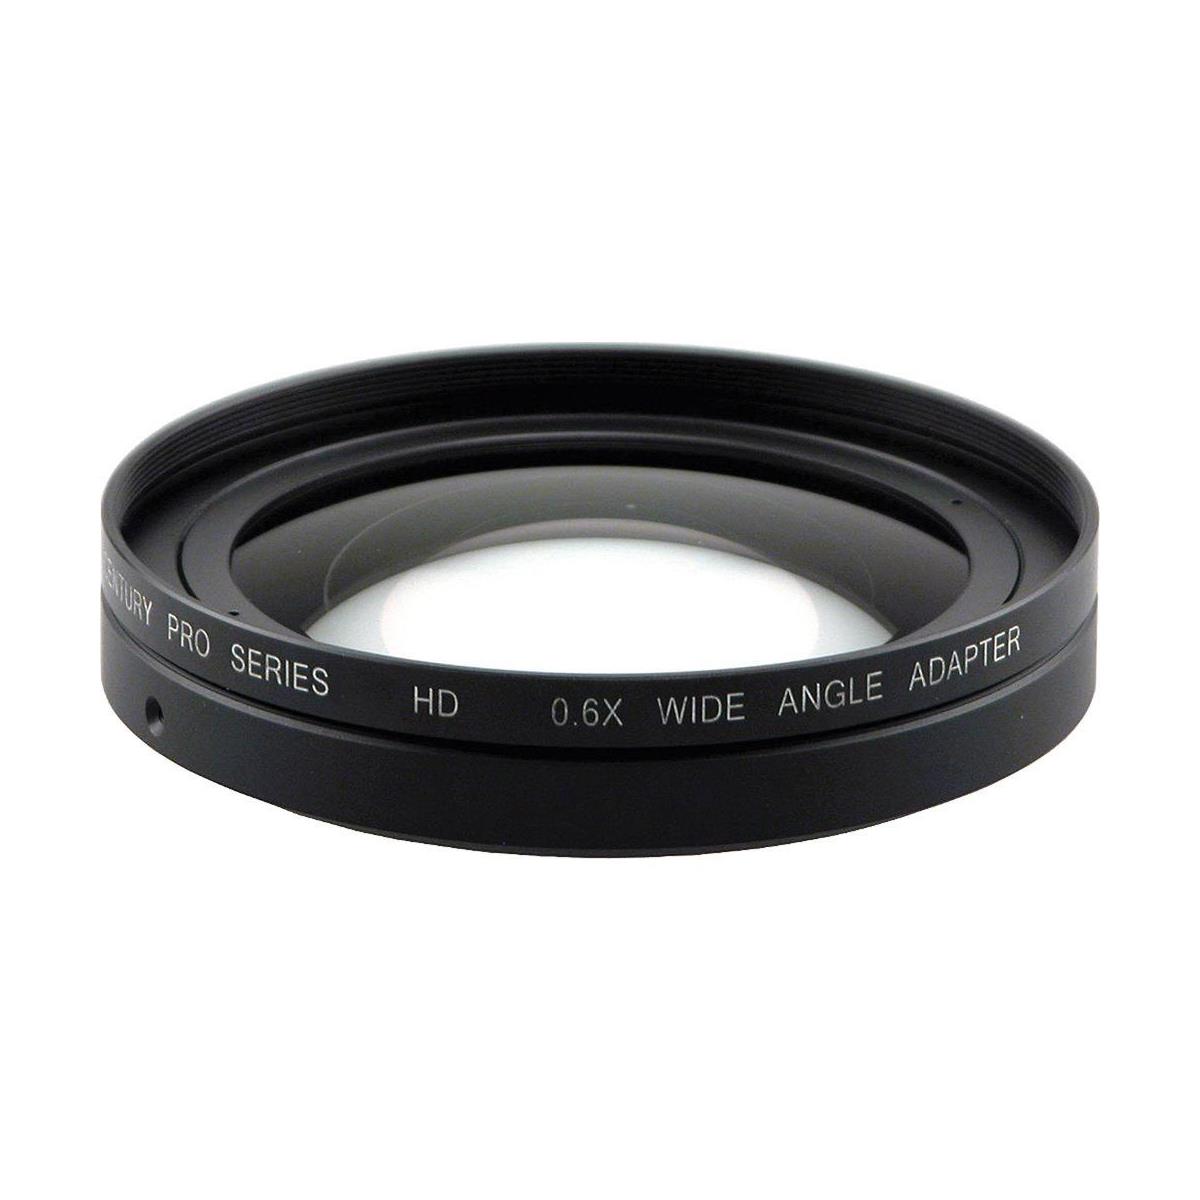 Image of Century Optics 0.6x Wide Angle Adapter for Canon XF300/305 Camcorders